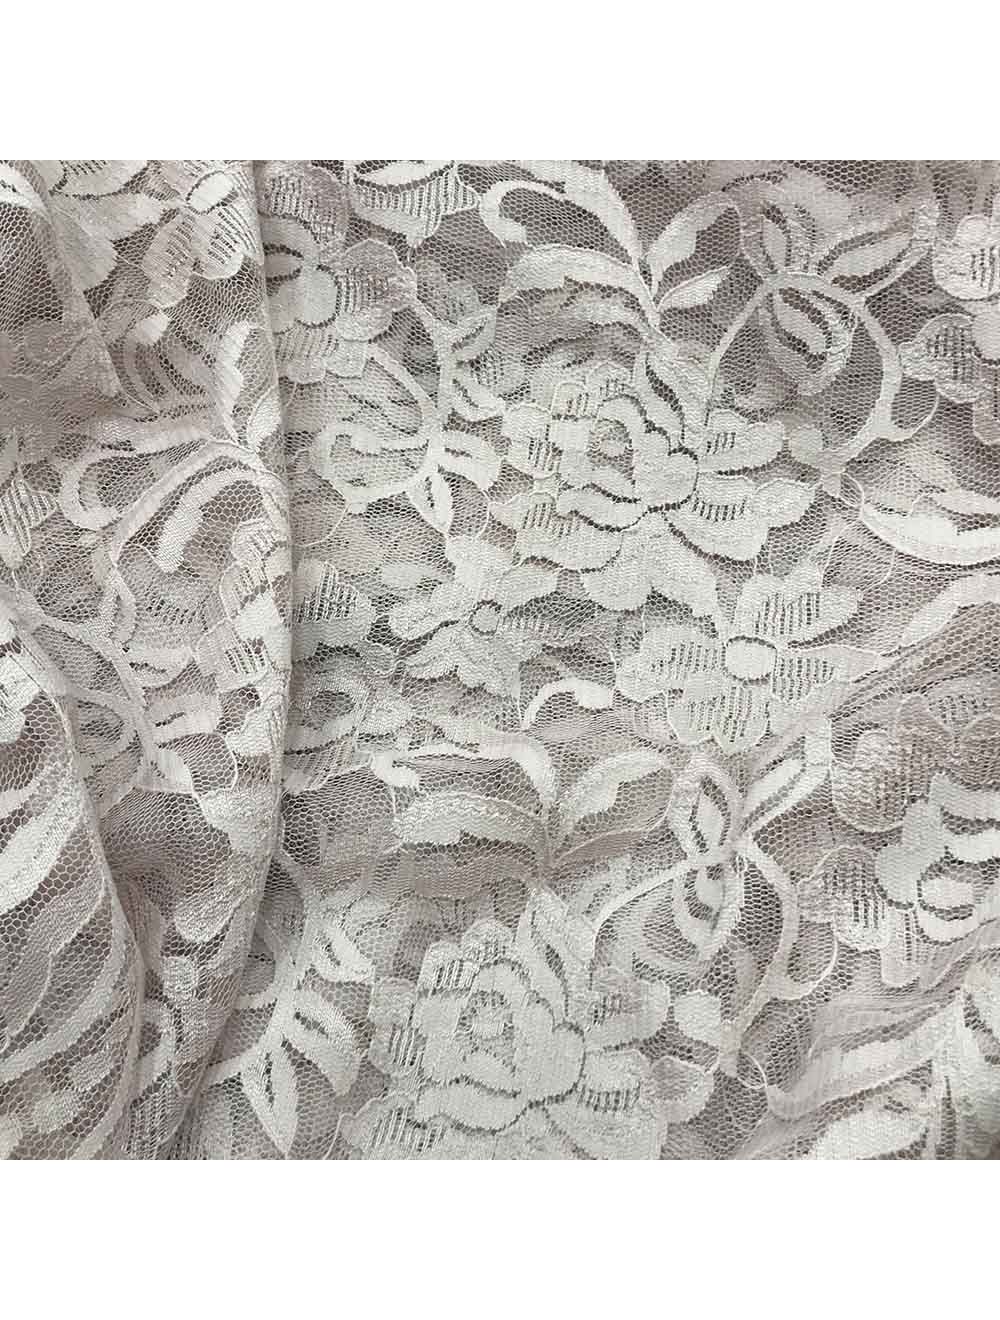 Peach Pink Net Lace Fabric 54 Inches Width